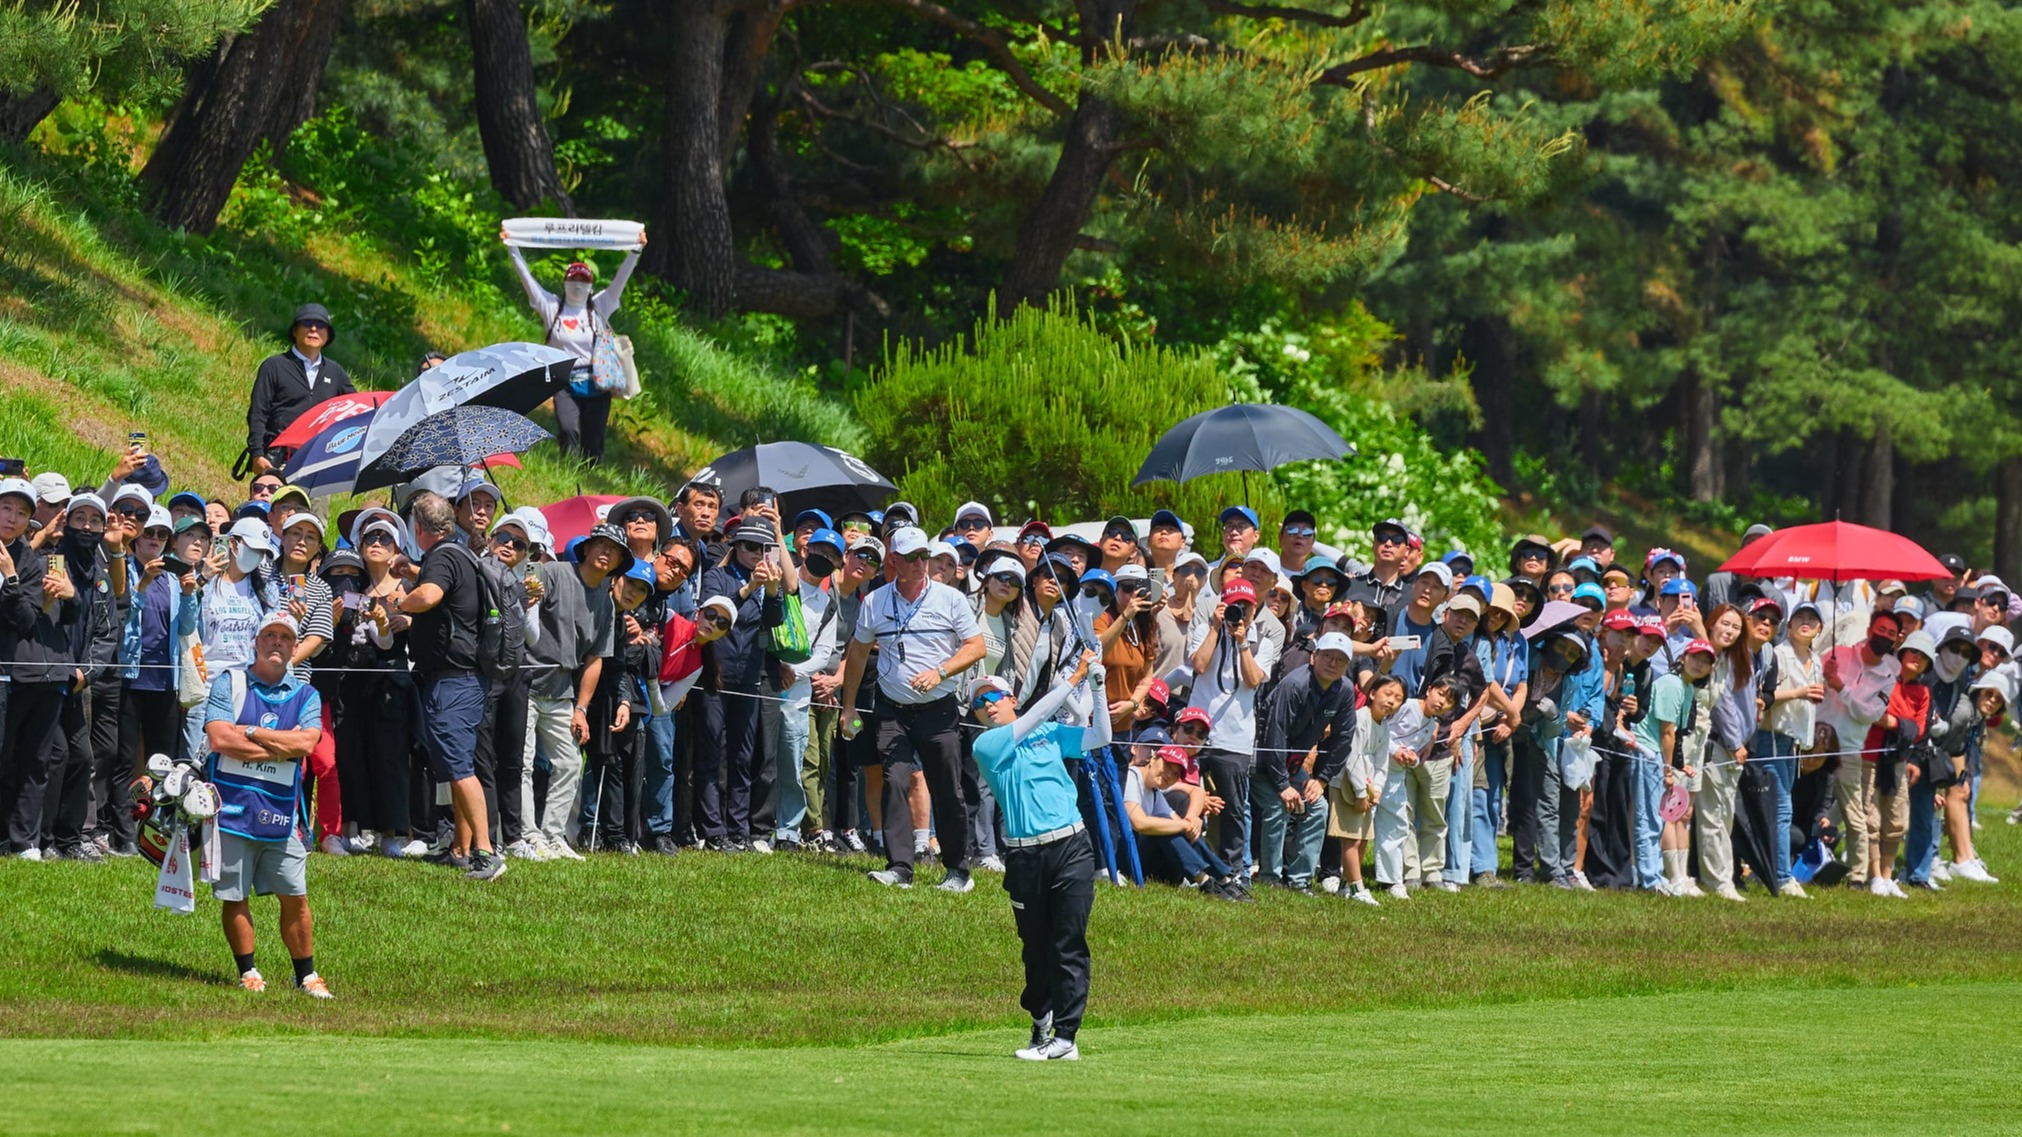 Hyo-Joo Kim playing her approach into the green in front of her fans